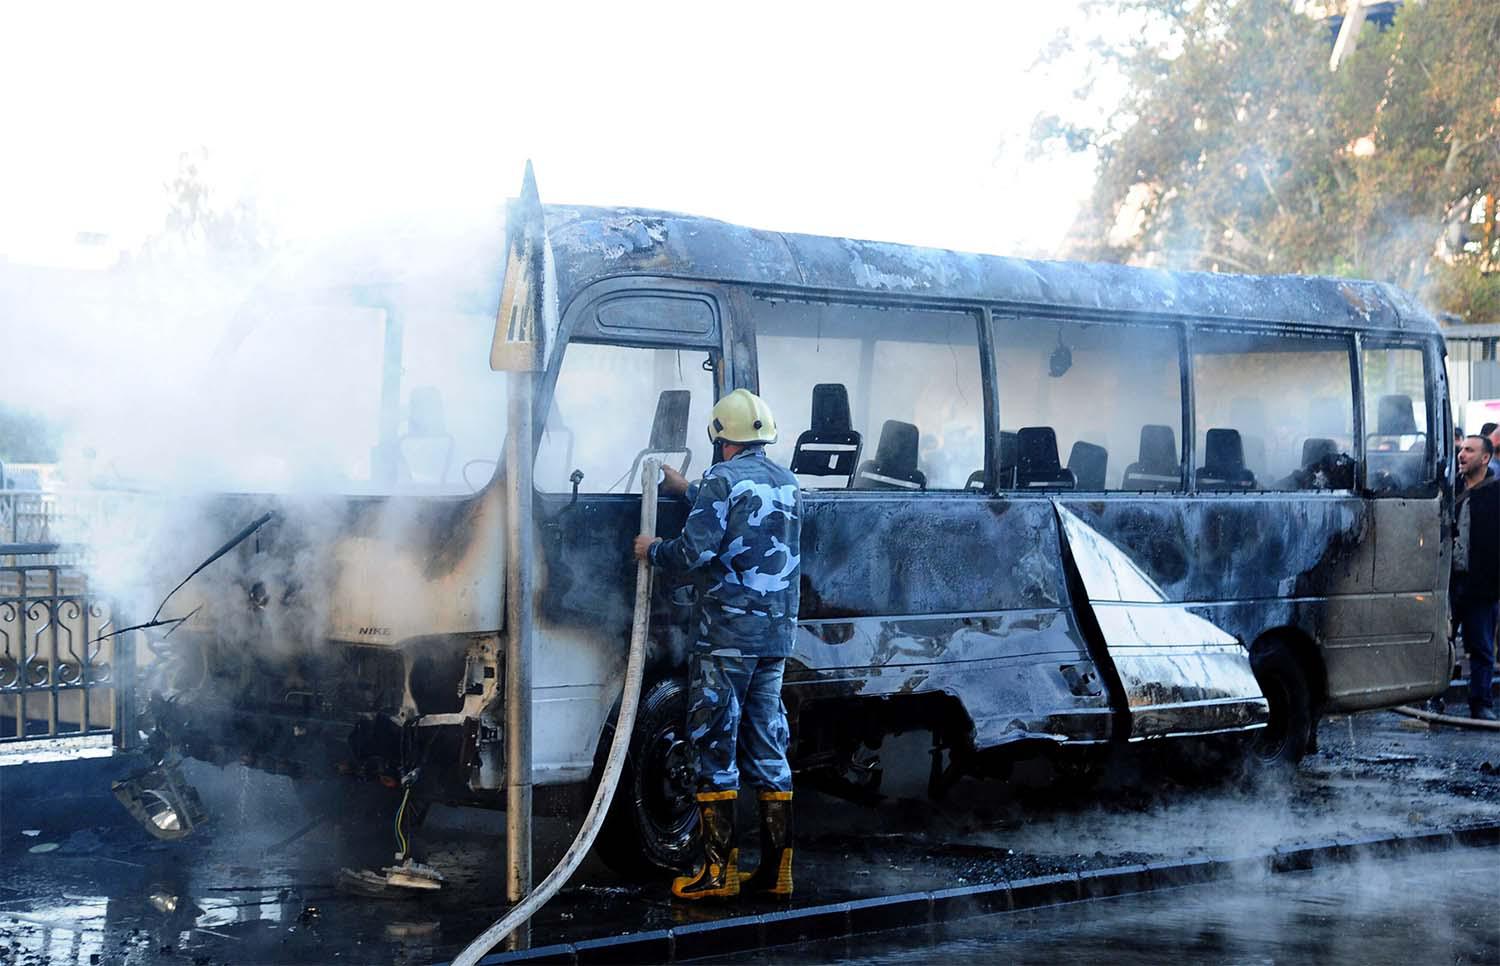 The military bus charred